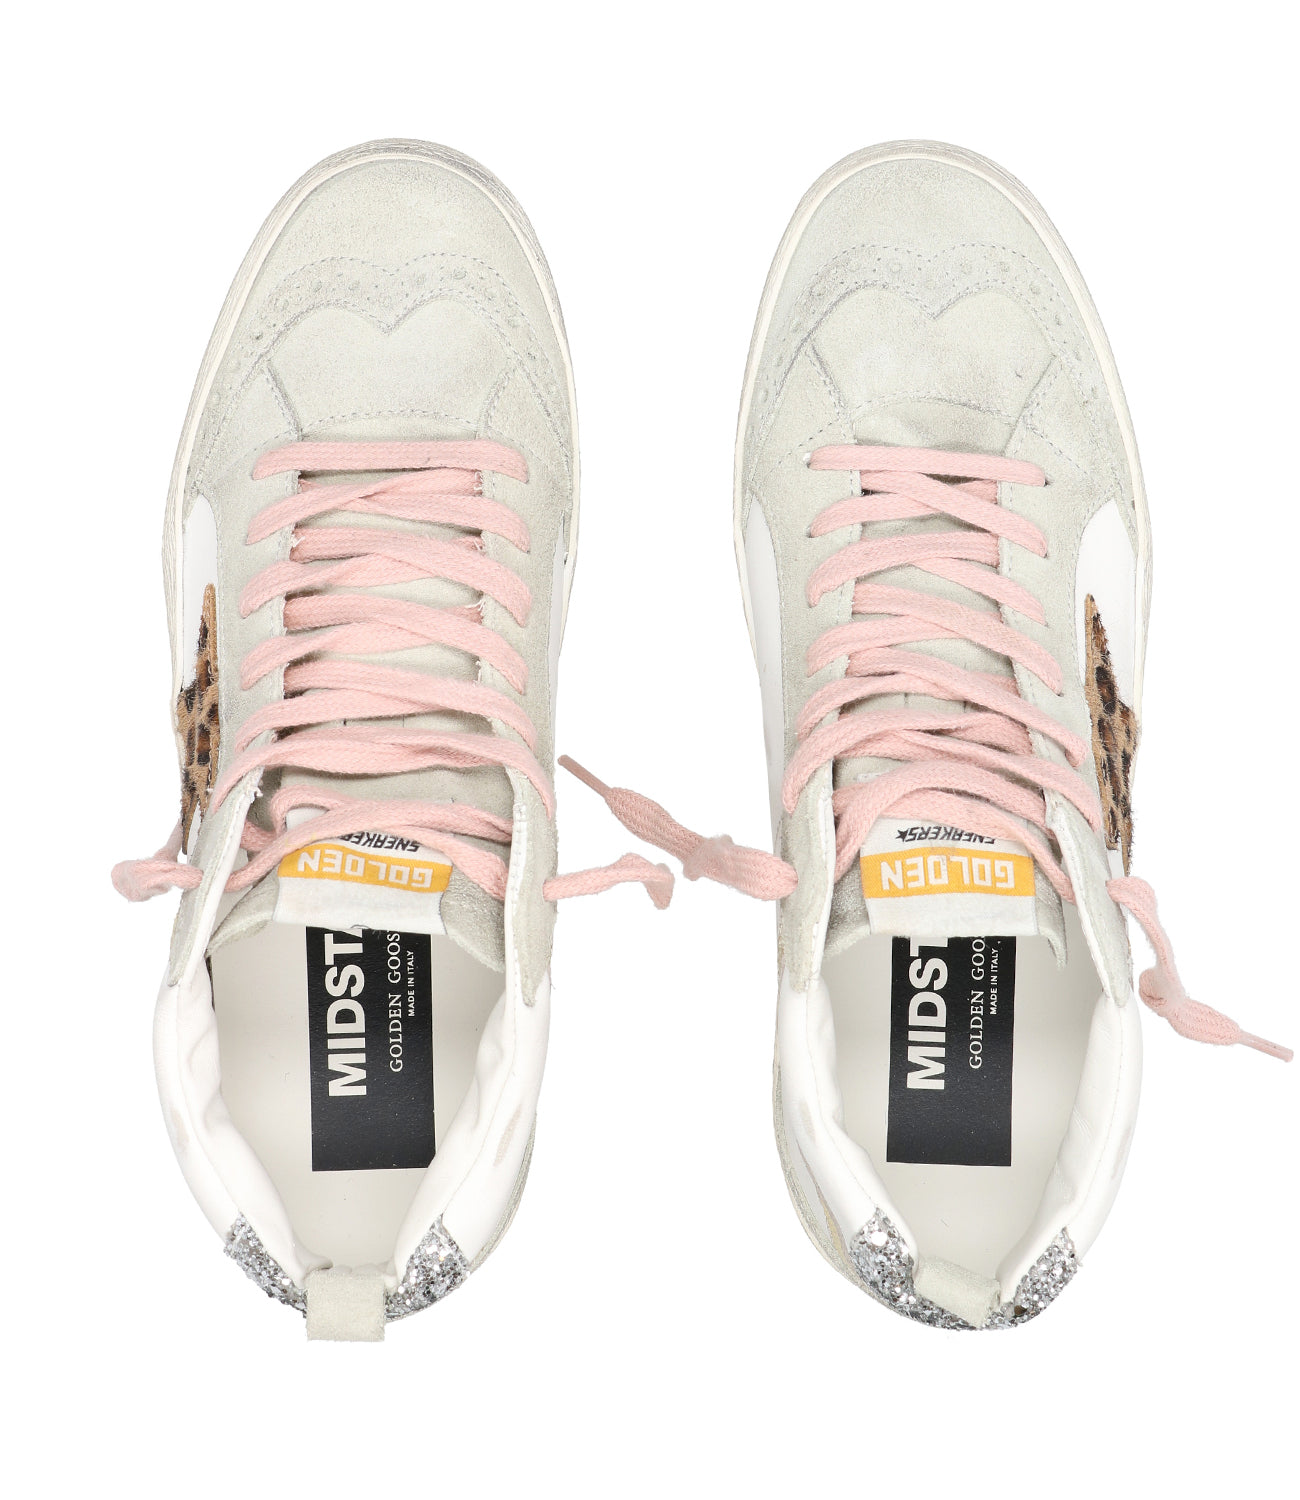 Golden Goose | Mid Star Sneaker White and Silver